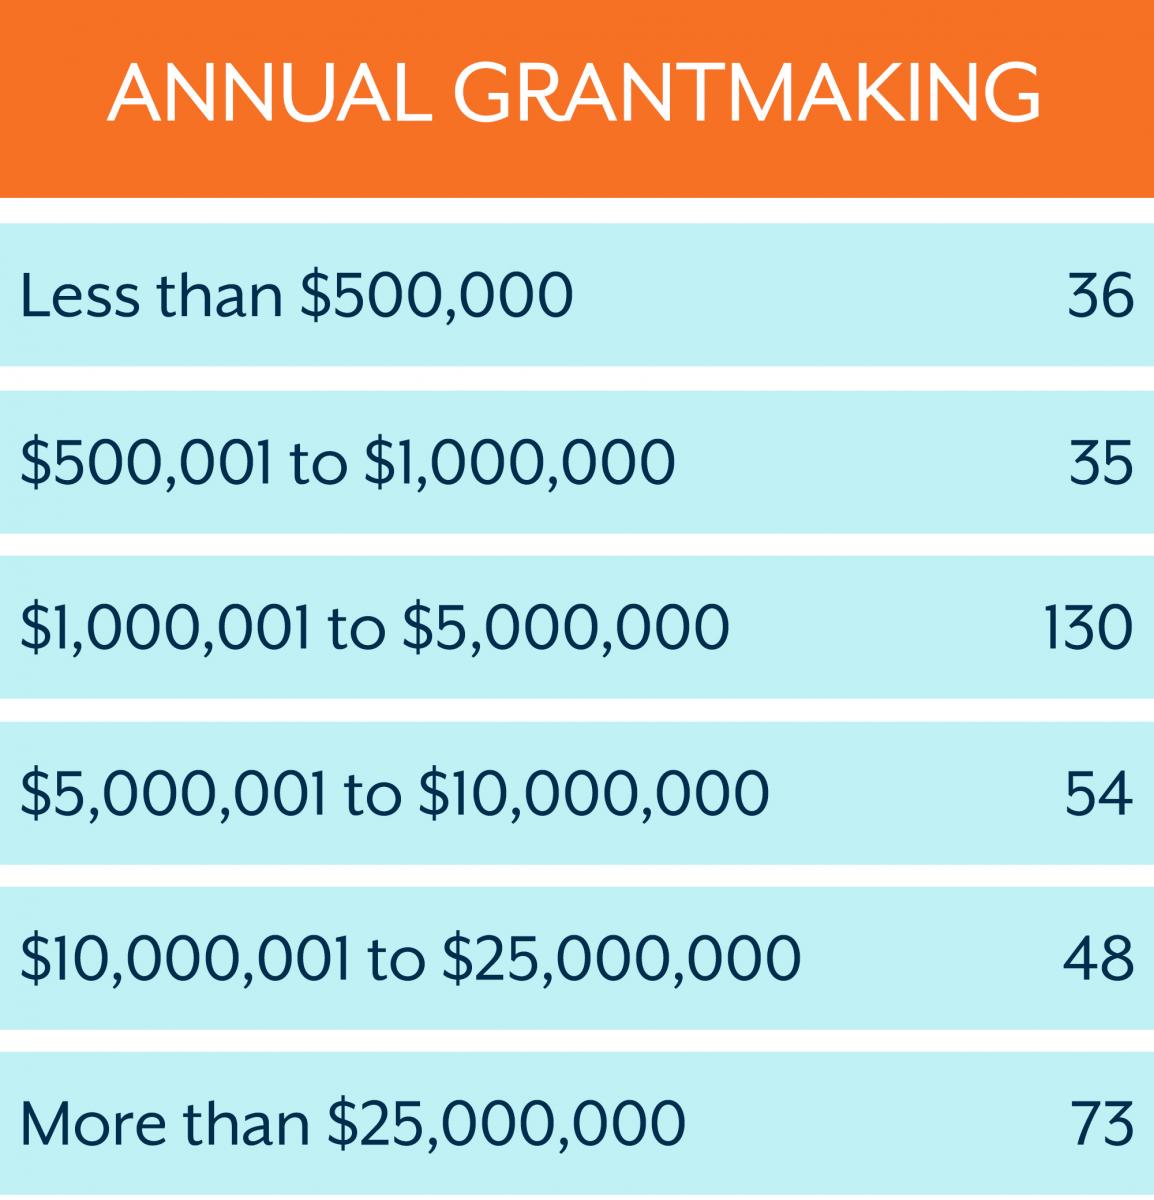 Total Survey Responses by Grantmaking Amount: Less than $500,000 = 36, $500,001 to $1 million = 35, $1 million to $5 million = 130, $5 million to $10 million = 54, $10 million to $25 million = 48, More than $25 million = 73